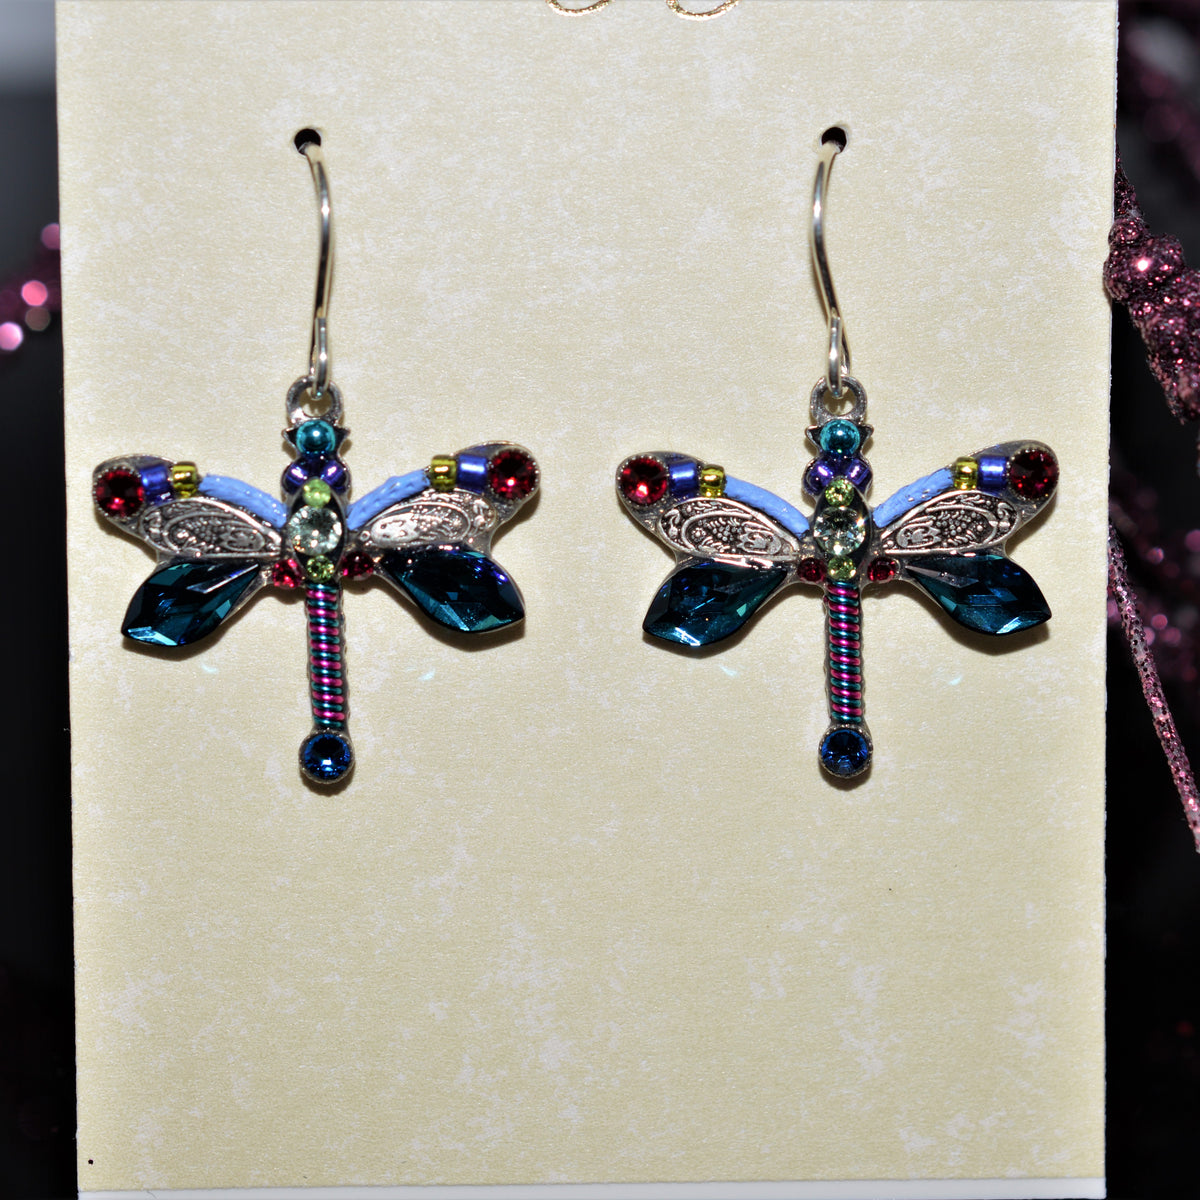 Antique Silver Plated Large Dragonfly Earrings With Bermuda Blue Crystals by Firefly